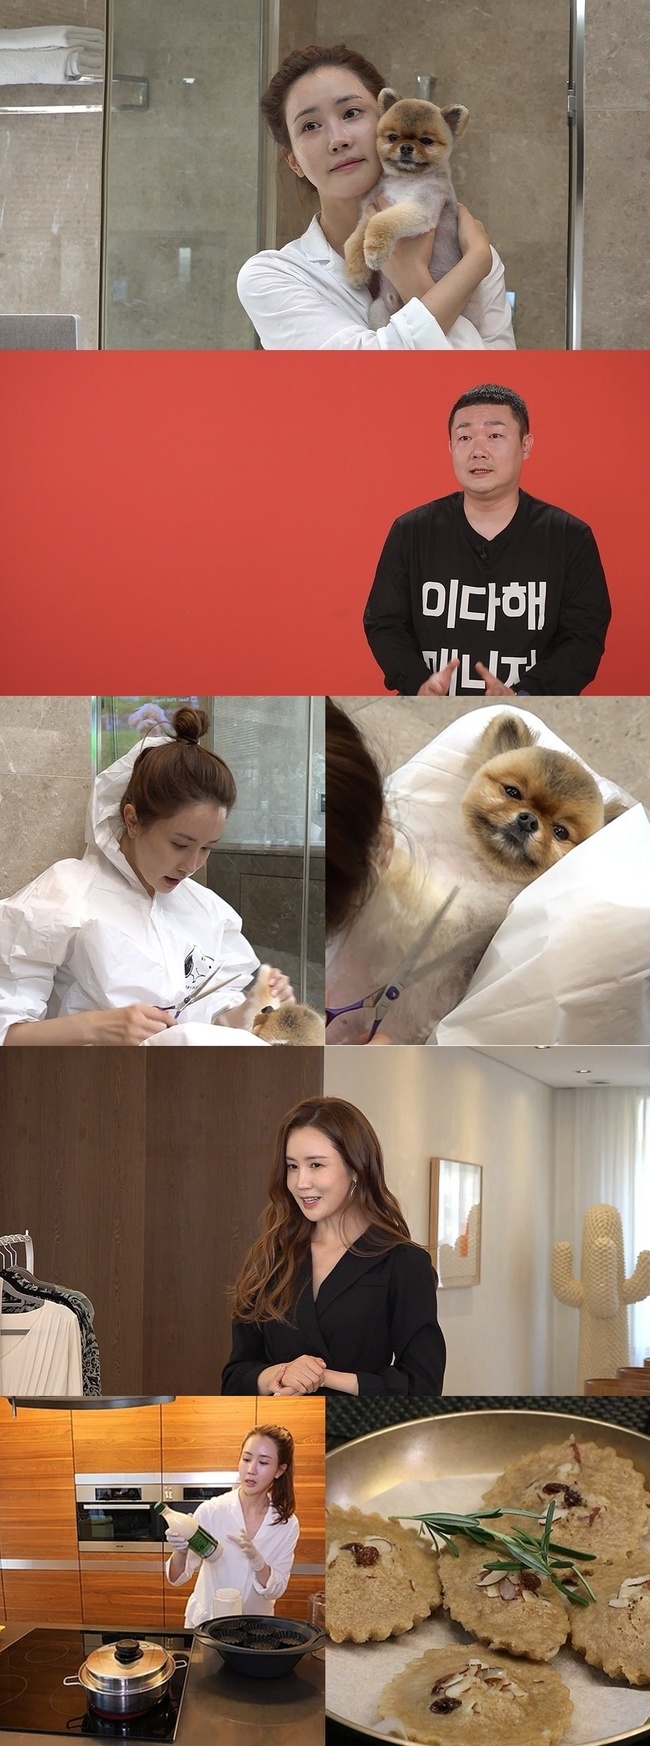 Lee Da-hae floats in Point of Omniscient InterfereIn the 184th MBC Point of Omniscient Interfere (planned by Park Jung-gyu / directed by Noh Si-yong, Yoon Hye-jin / hereinafter Point of Omniscient Interfere) broadcasted on January 8, Lee Da-hae appears and visits viewers in everyday life.Lee Da-hae will be on the first reality entertainment show of his life.Manager said, I am living a busy daily life. He added to Lee Da-haes unusual daily life.Lee Da-hae, captured on the Point of Omniscient Interfere camera, is impressed by the aspect of the gold-handed person in the past.In particular, Lee Da-hae is surprised by the gold hand class that gives her own dog beauty.Grayton, a dog, was so excited that he did not know the world and fell asleep while being beauty on Lee Da-haes professional scissors touch.